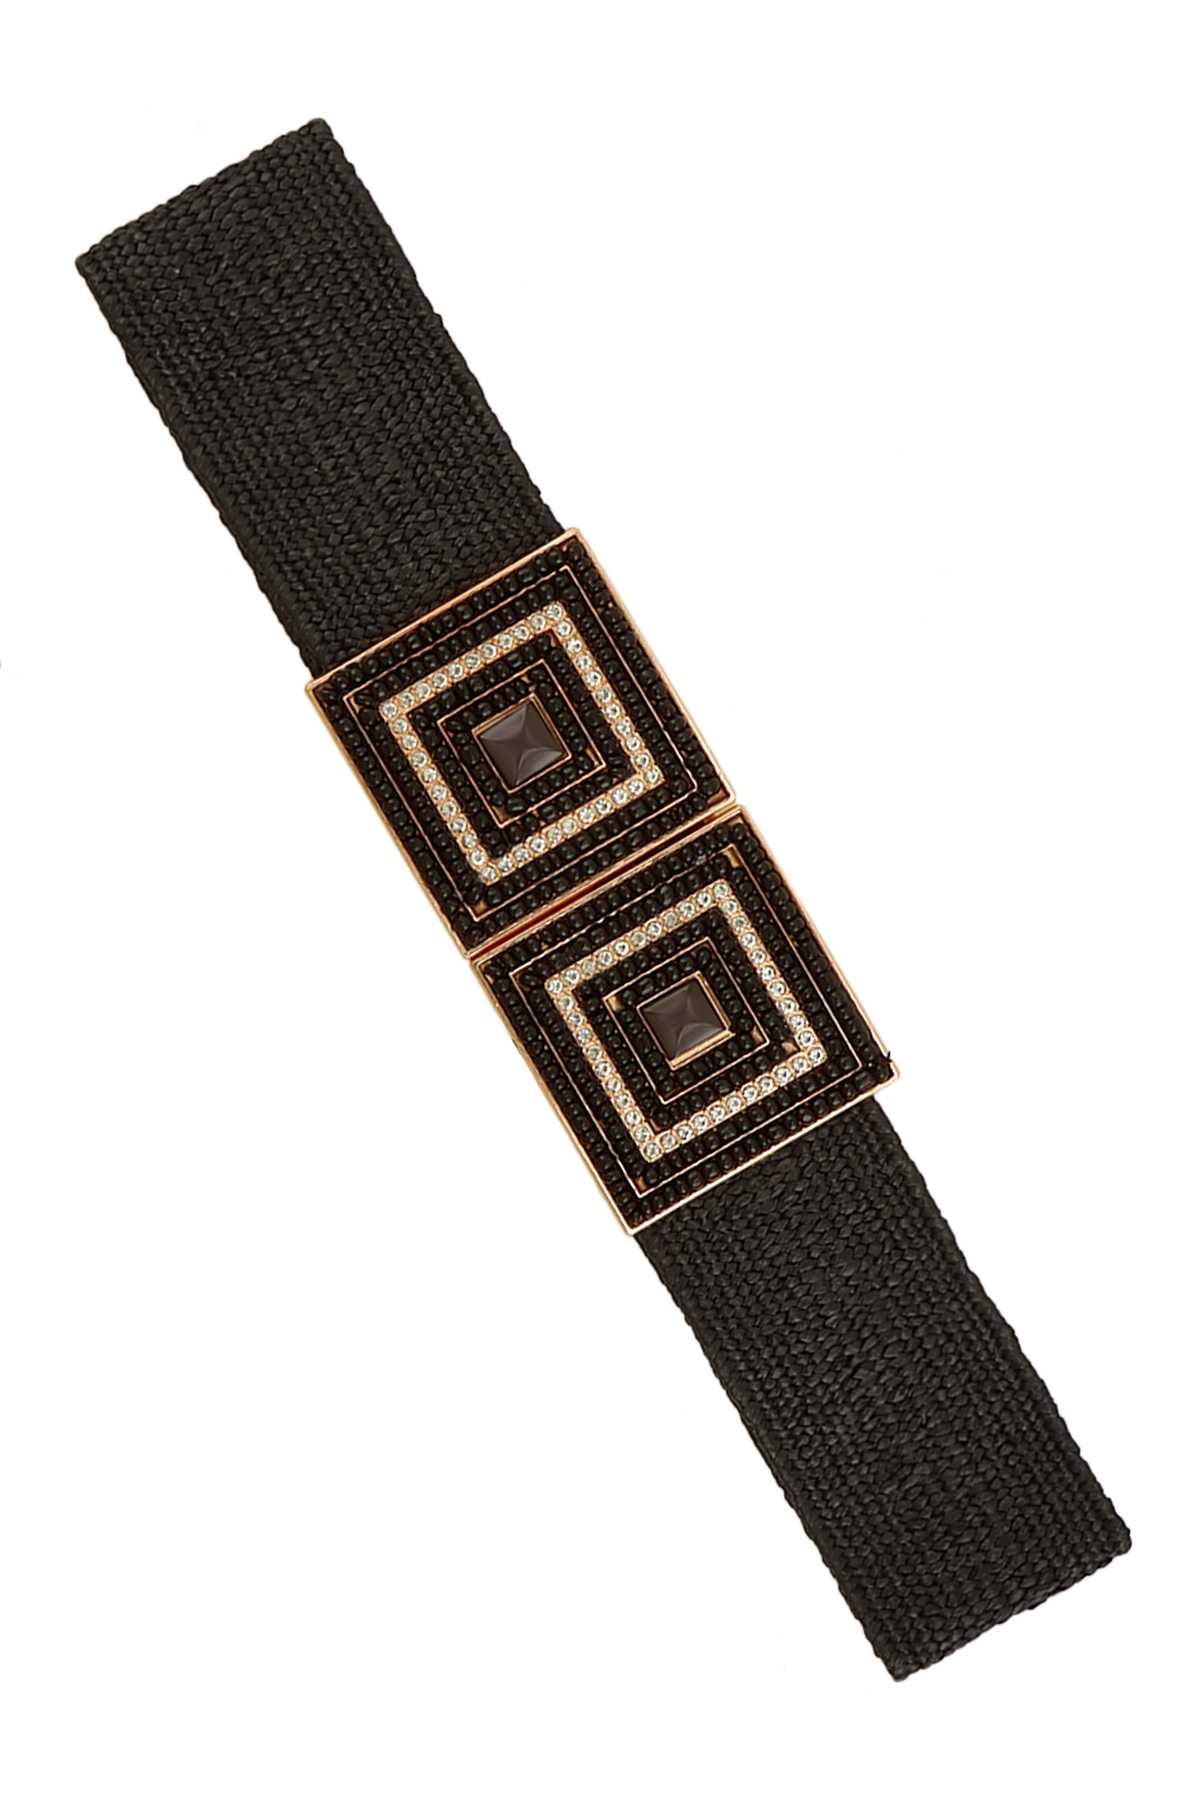 SQUARE BEADS AND CUBIC BUCKLE ELASTIC STRAW BELT